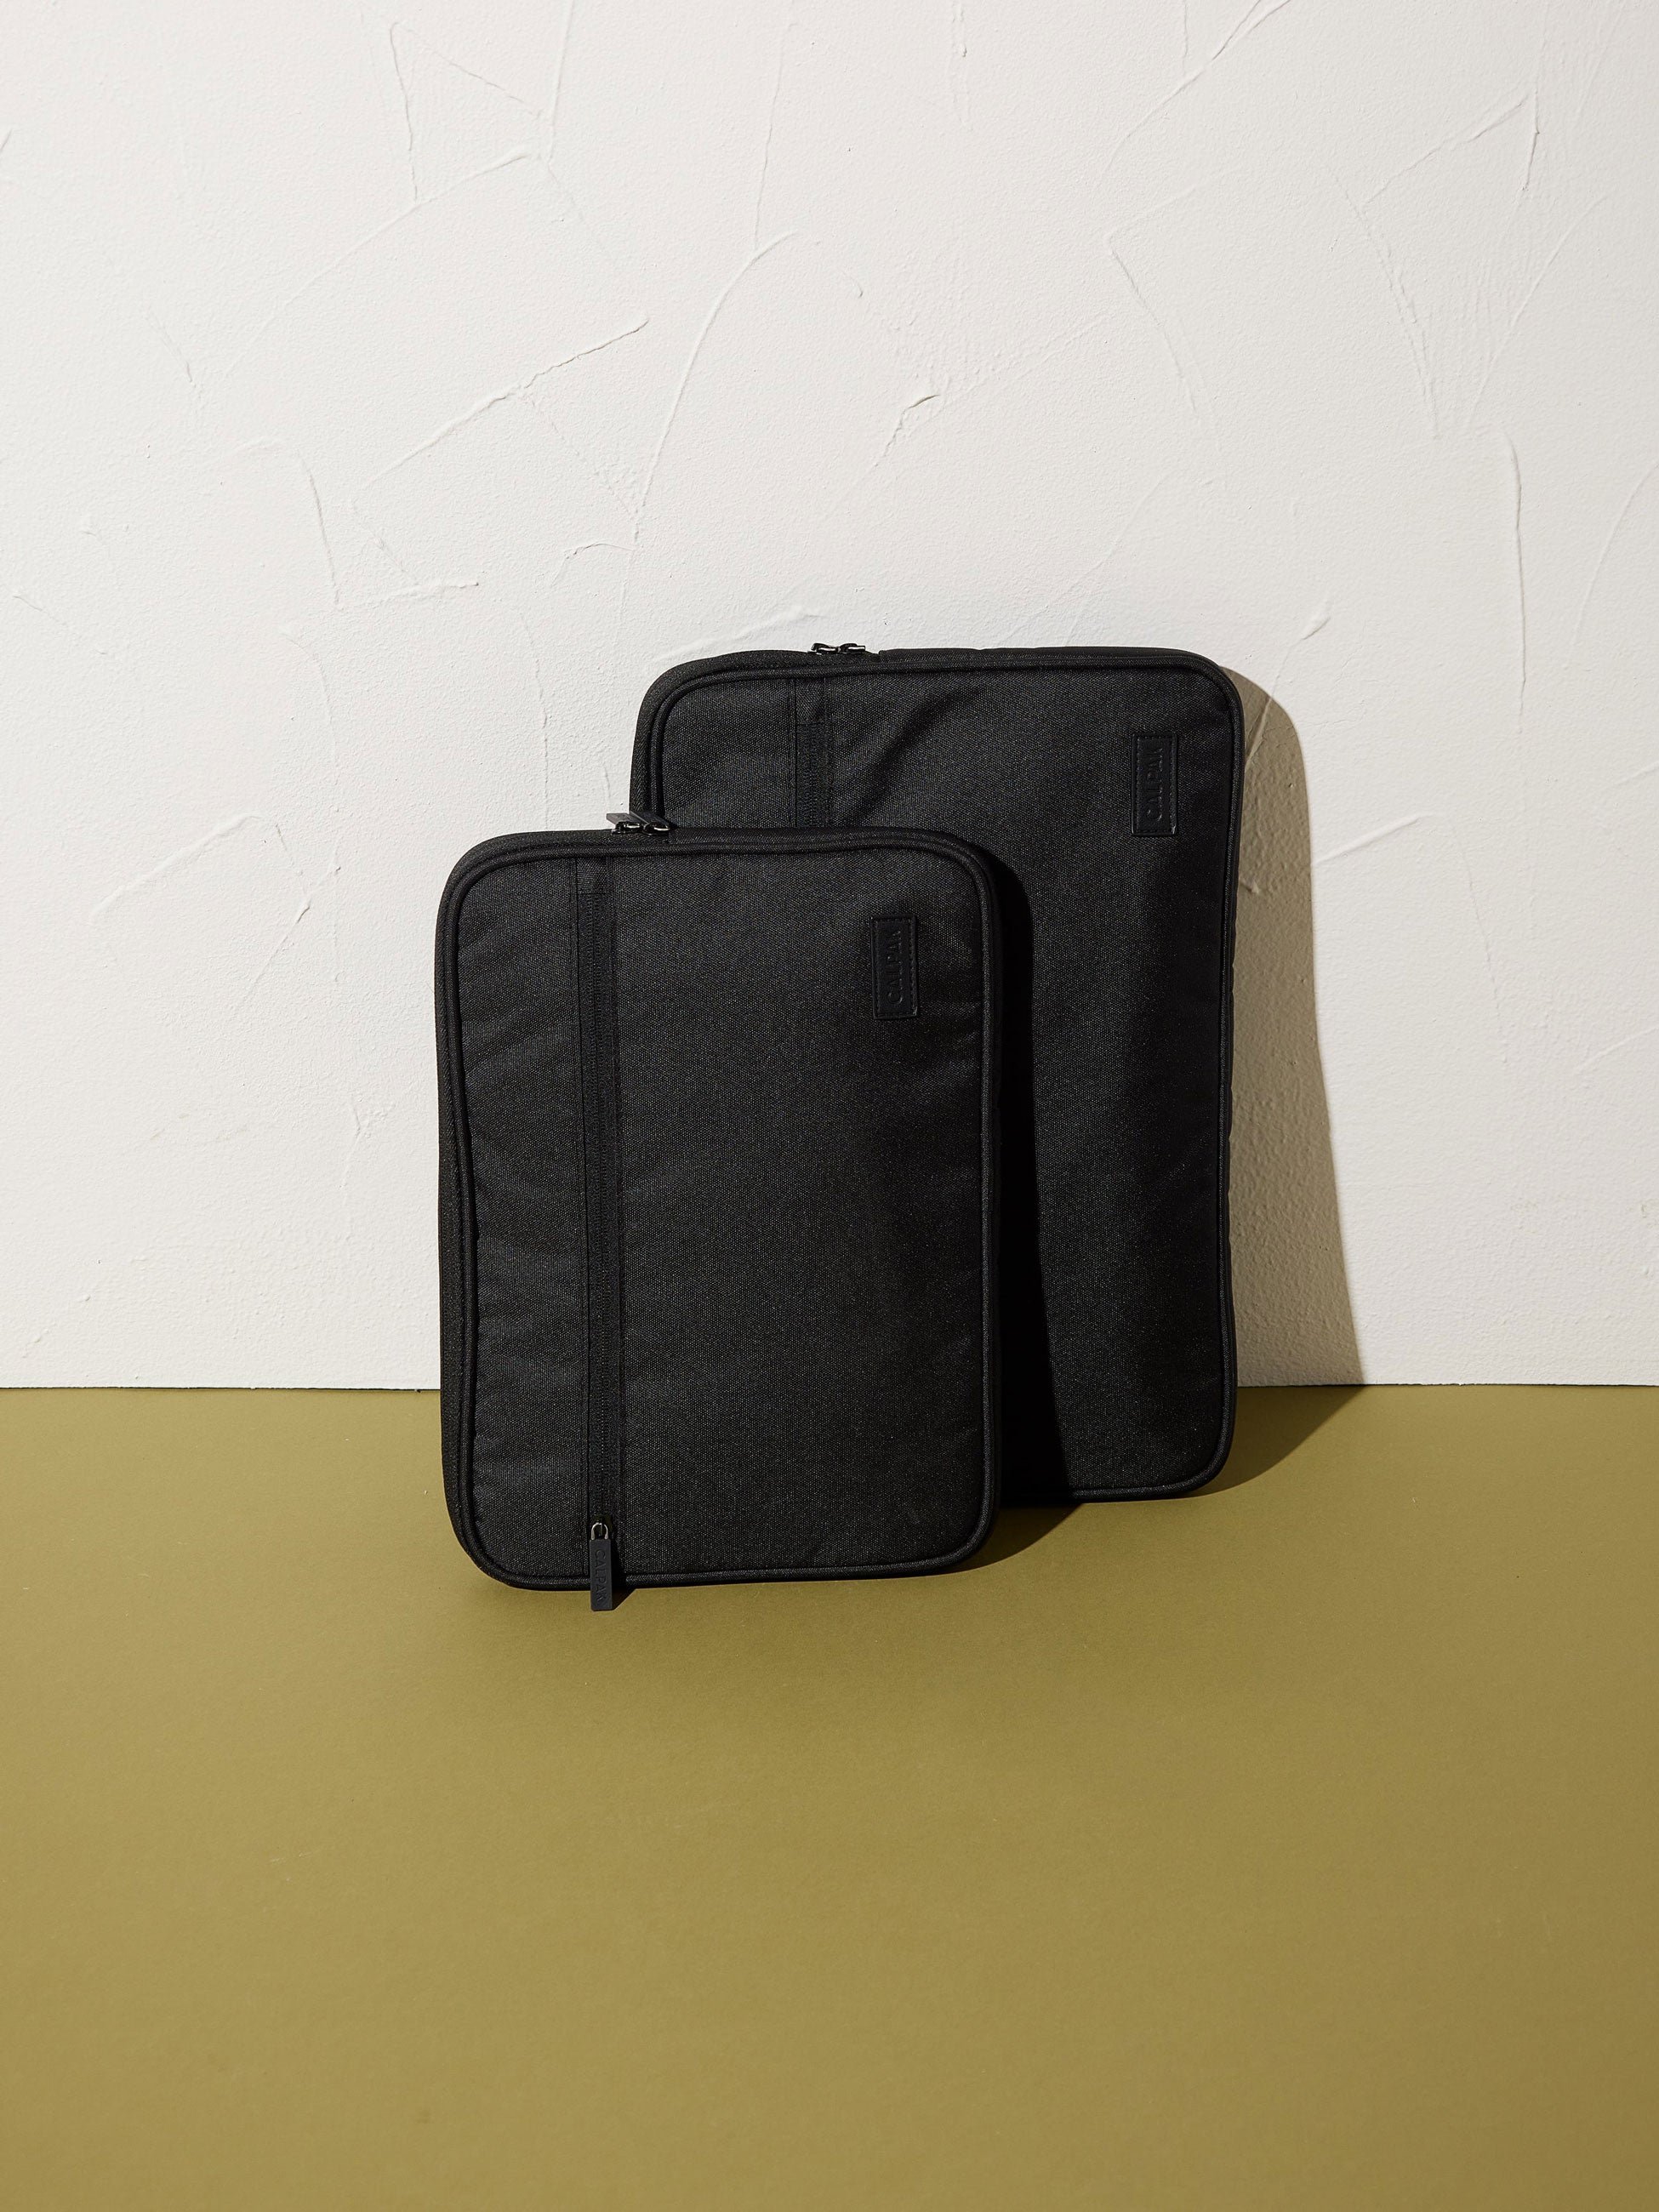 CALPAK Padded Laptop Sleeve in sizes 15-17in and 13-14in